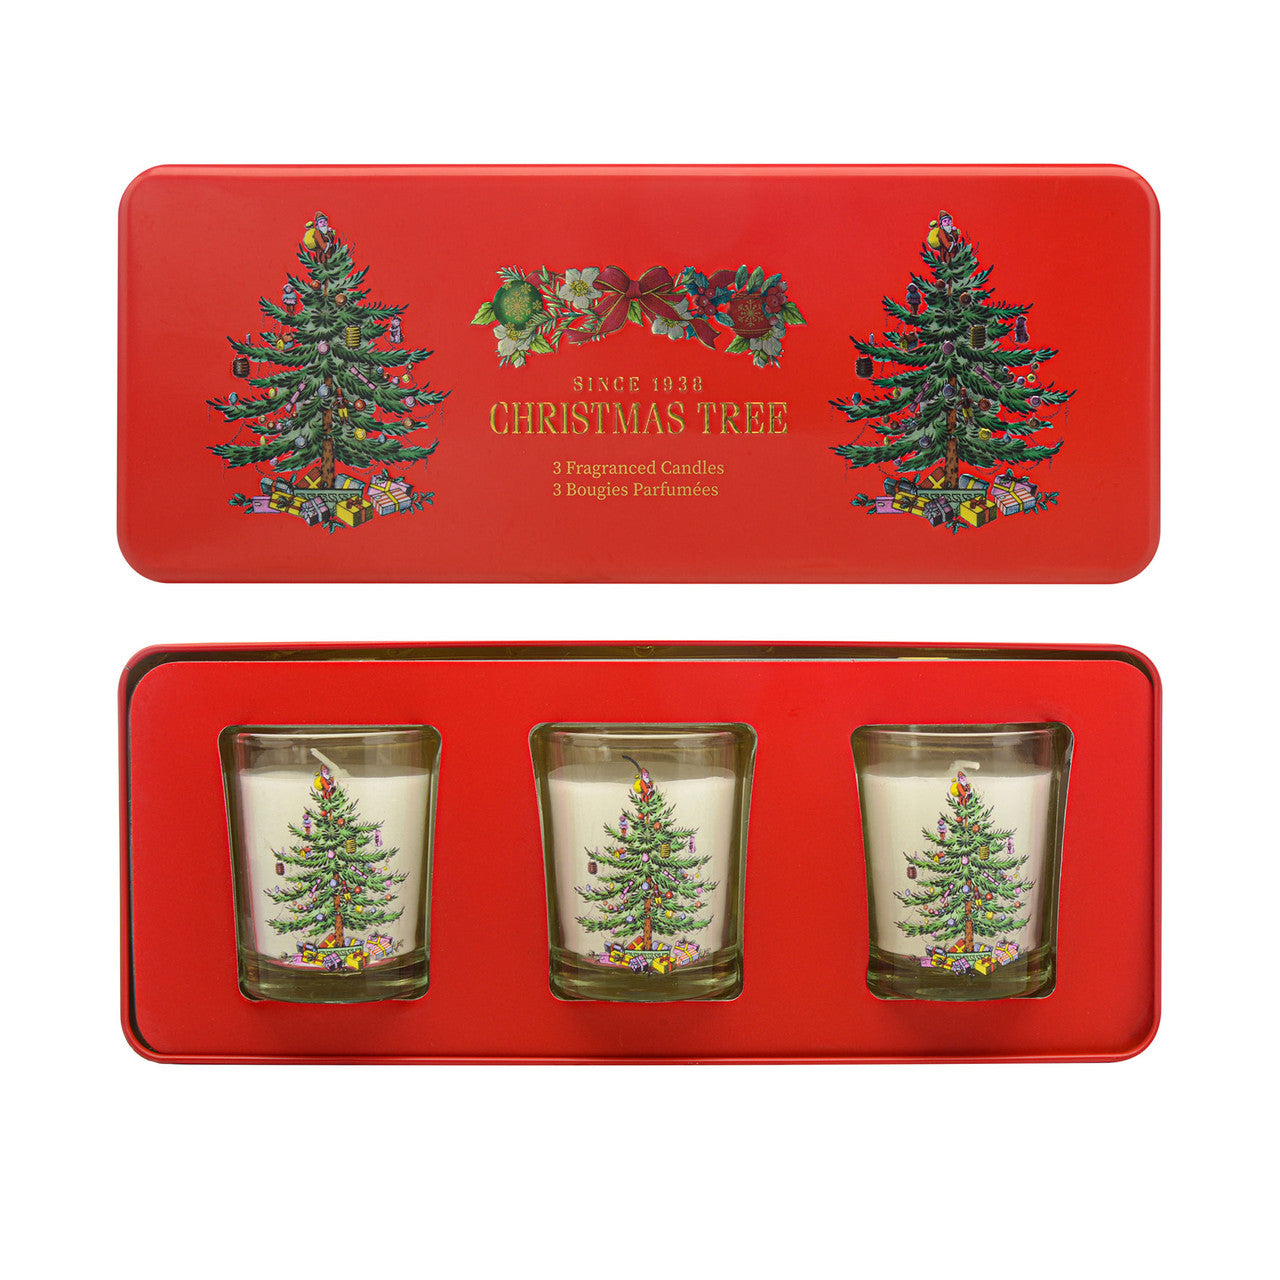 Christmas Tree Votive Gift Set by Wax Lyrical. Made in the UK.